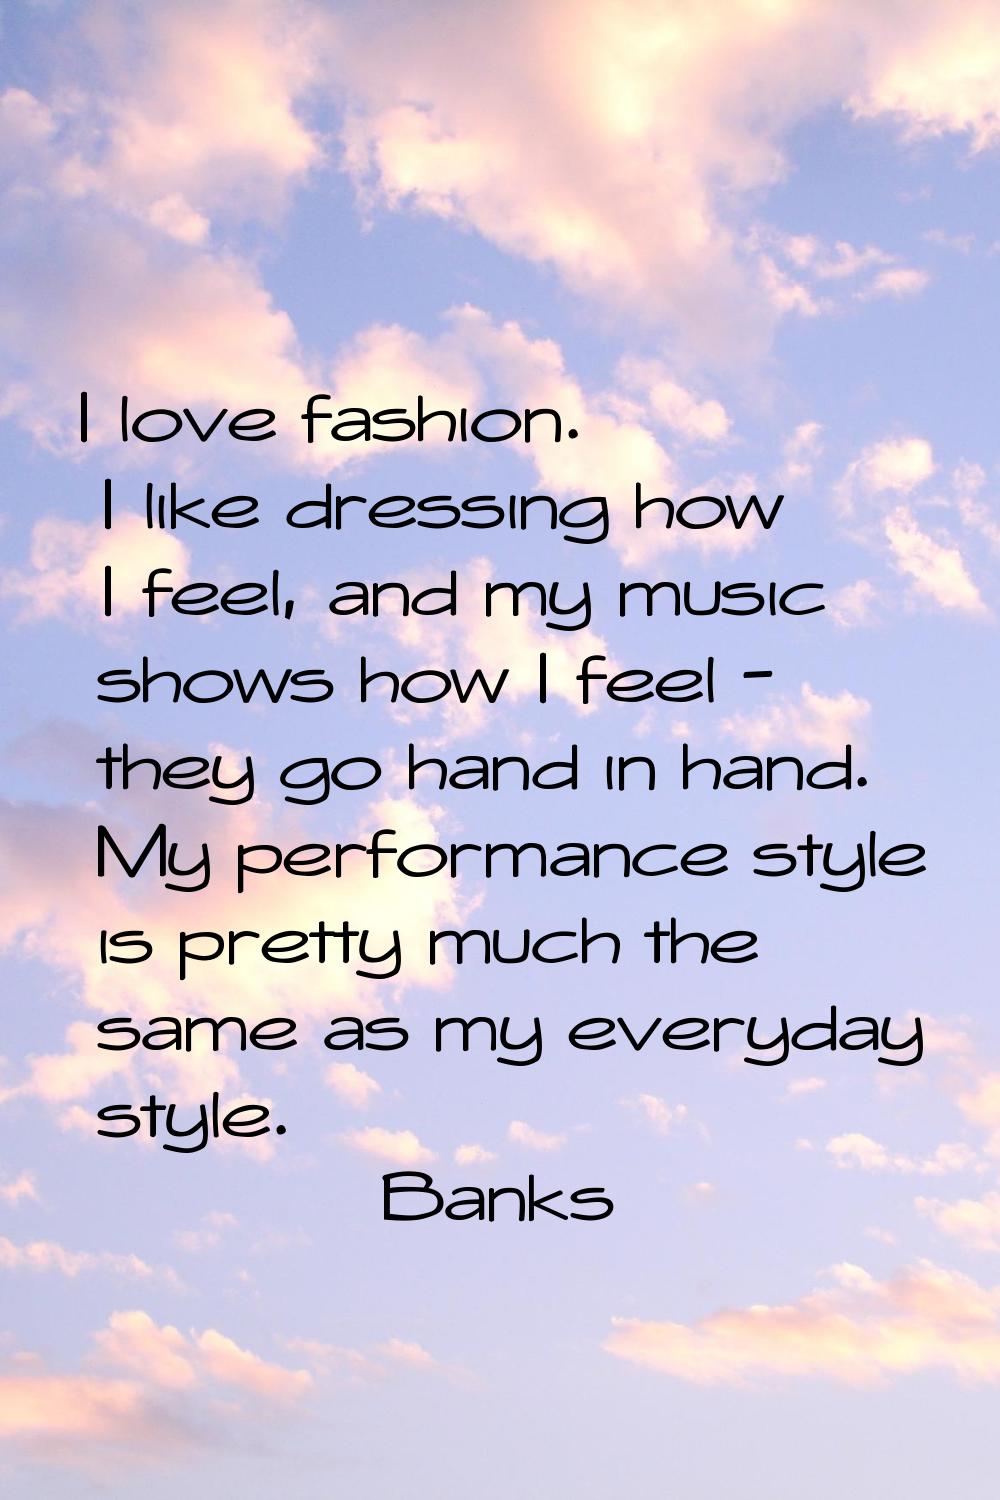 I love fashion. I like dressing how I feel, and my music shows how I feel - they go hand in hand. M